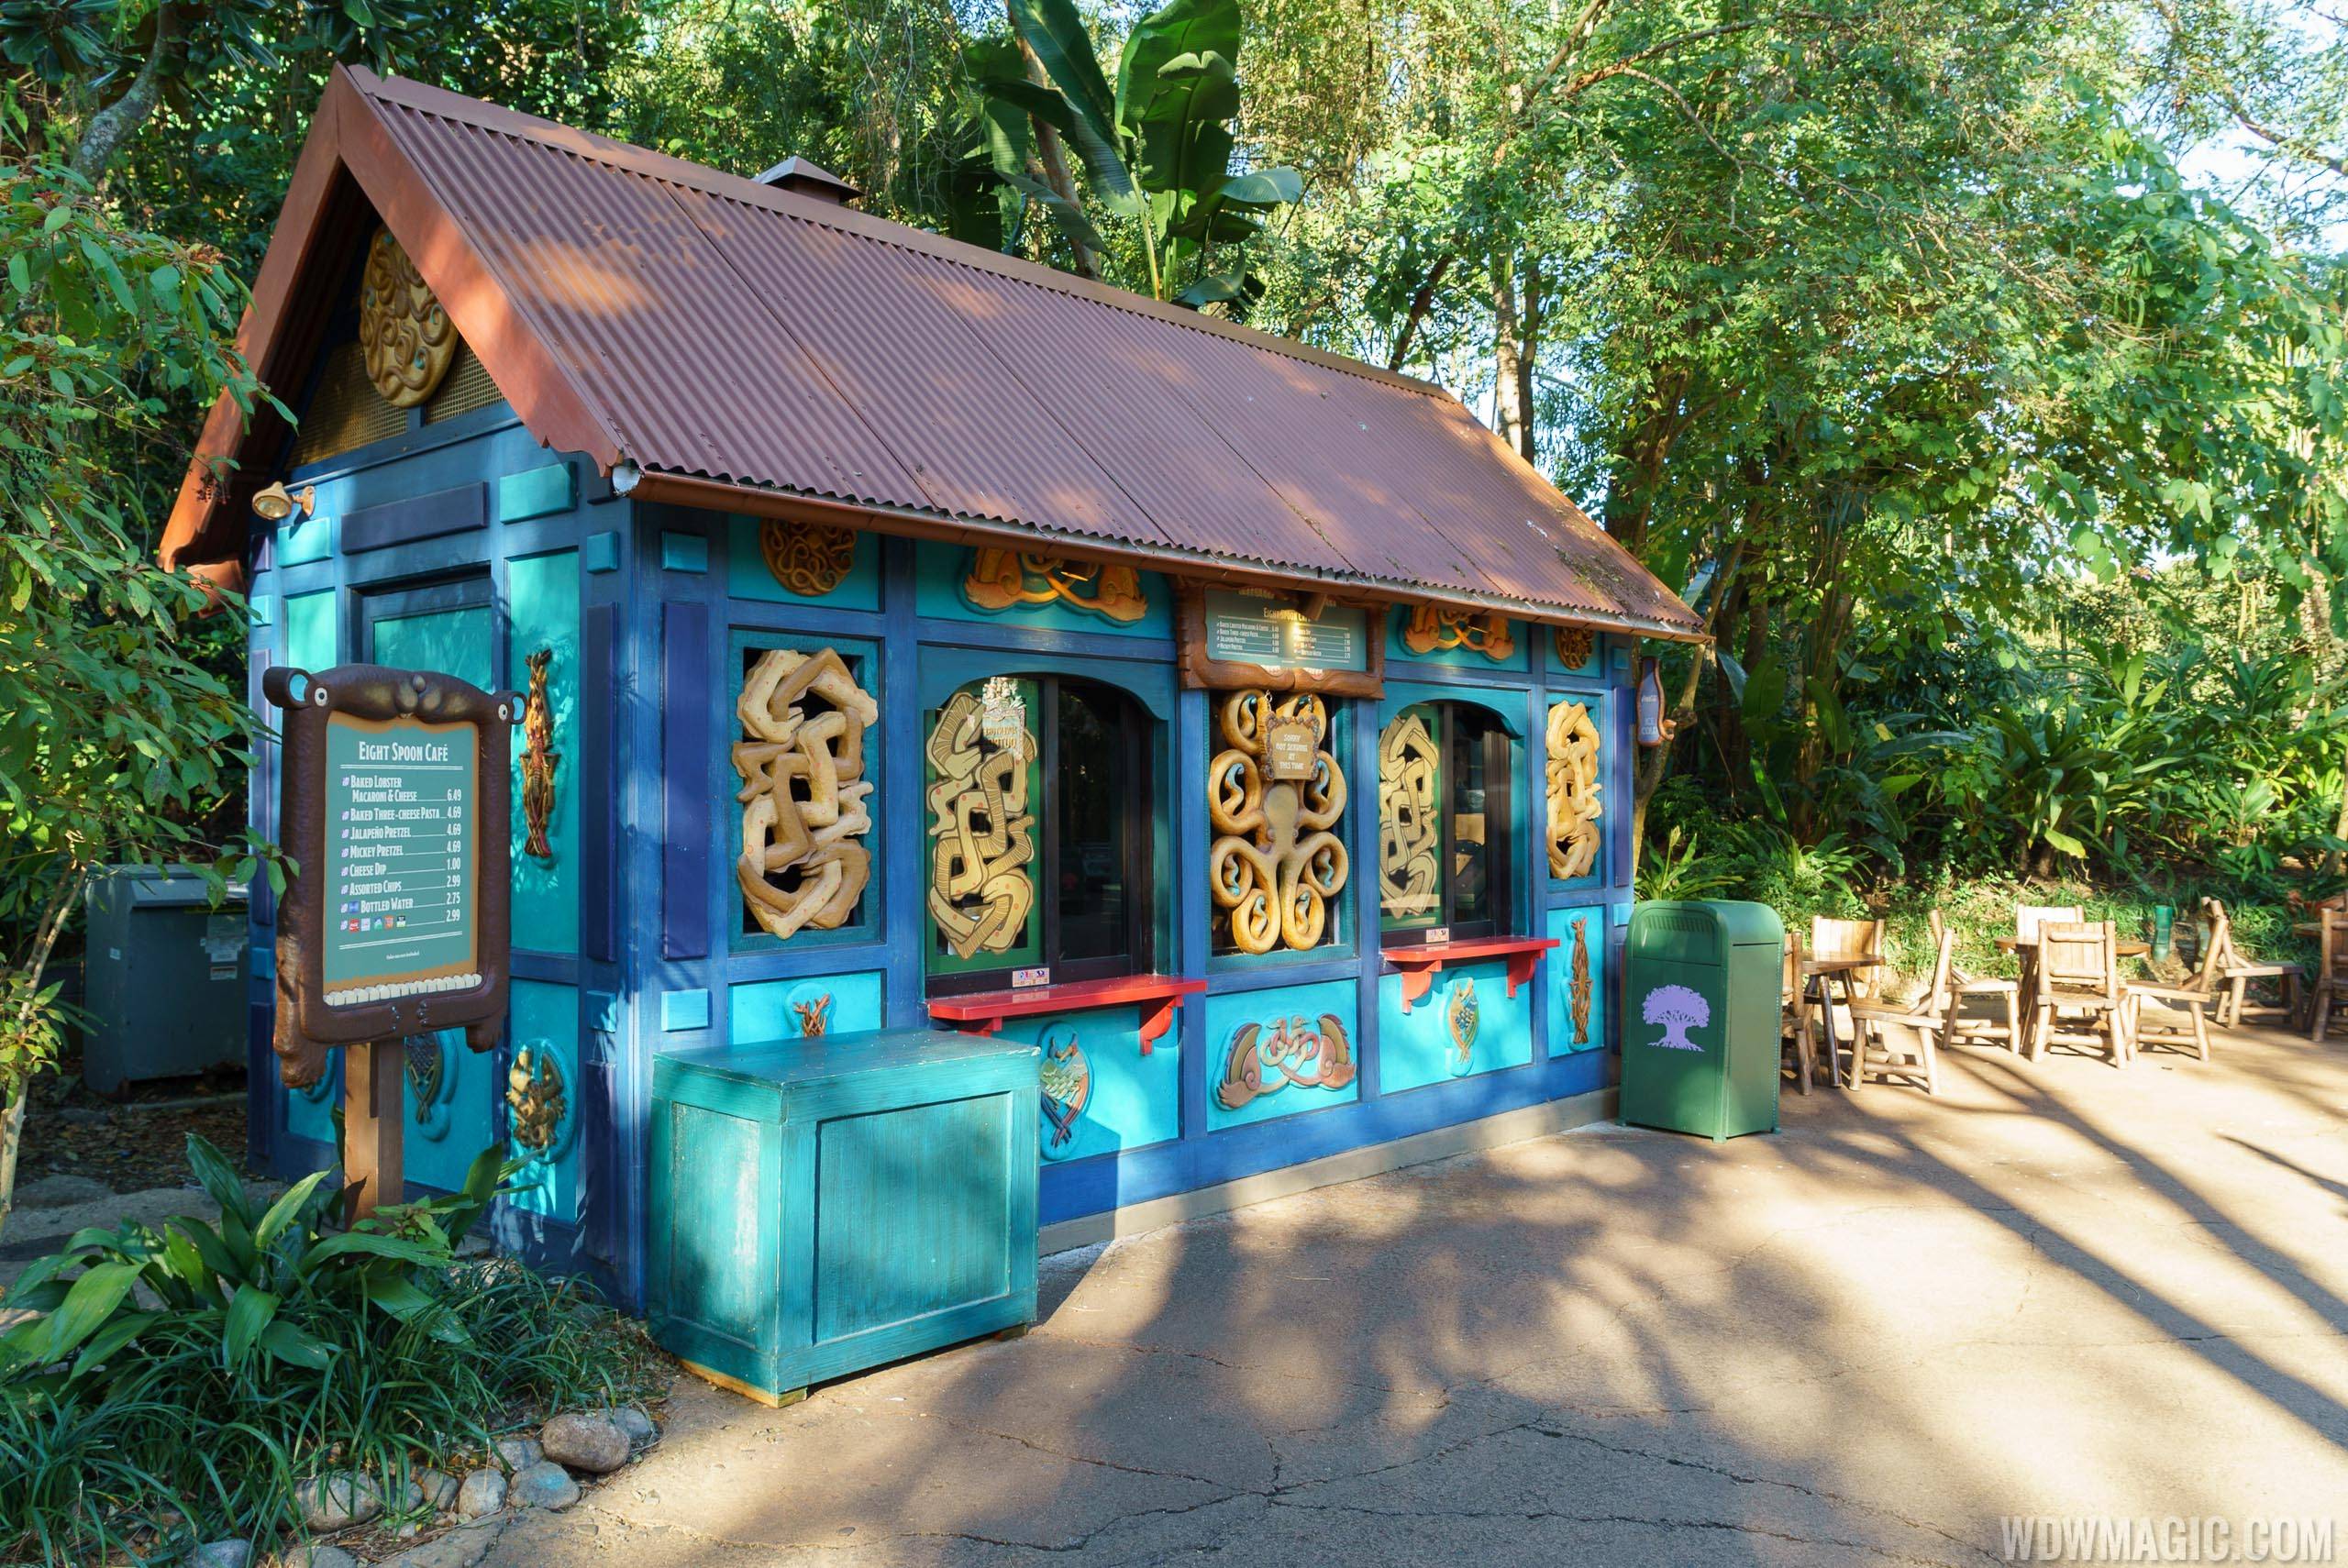 PHOTOS - New names and looks for snack kiosks at Disney's Animal Kingdom